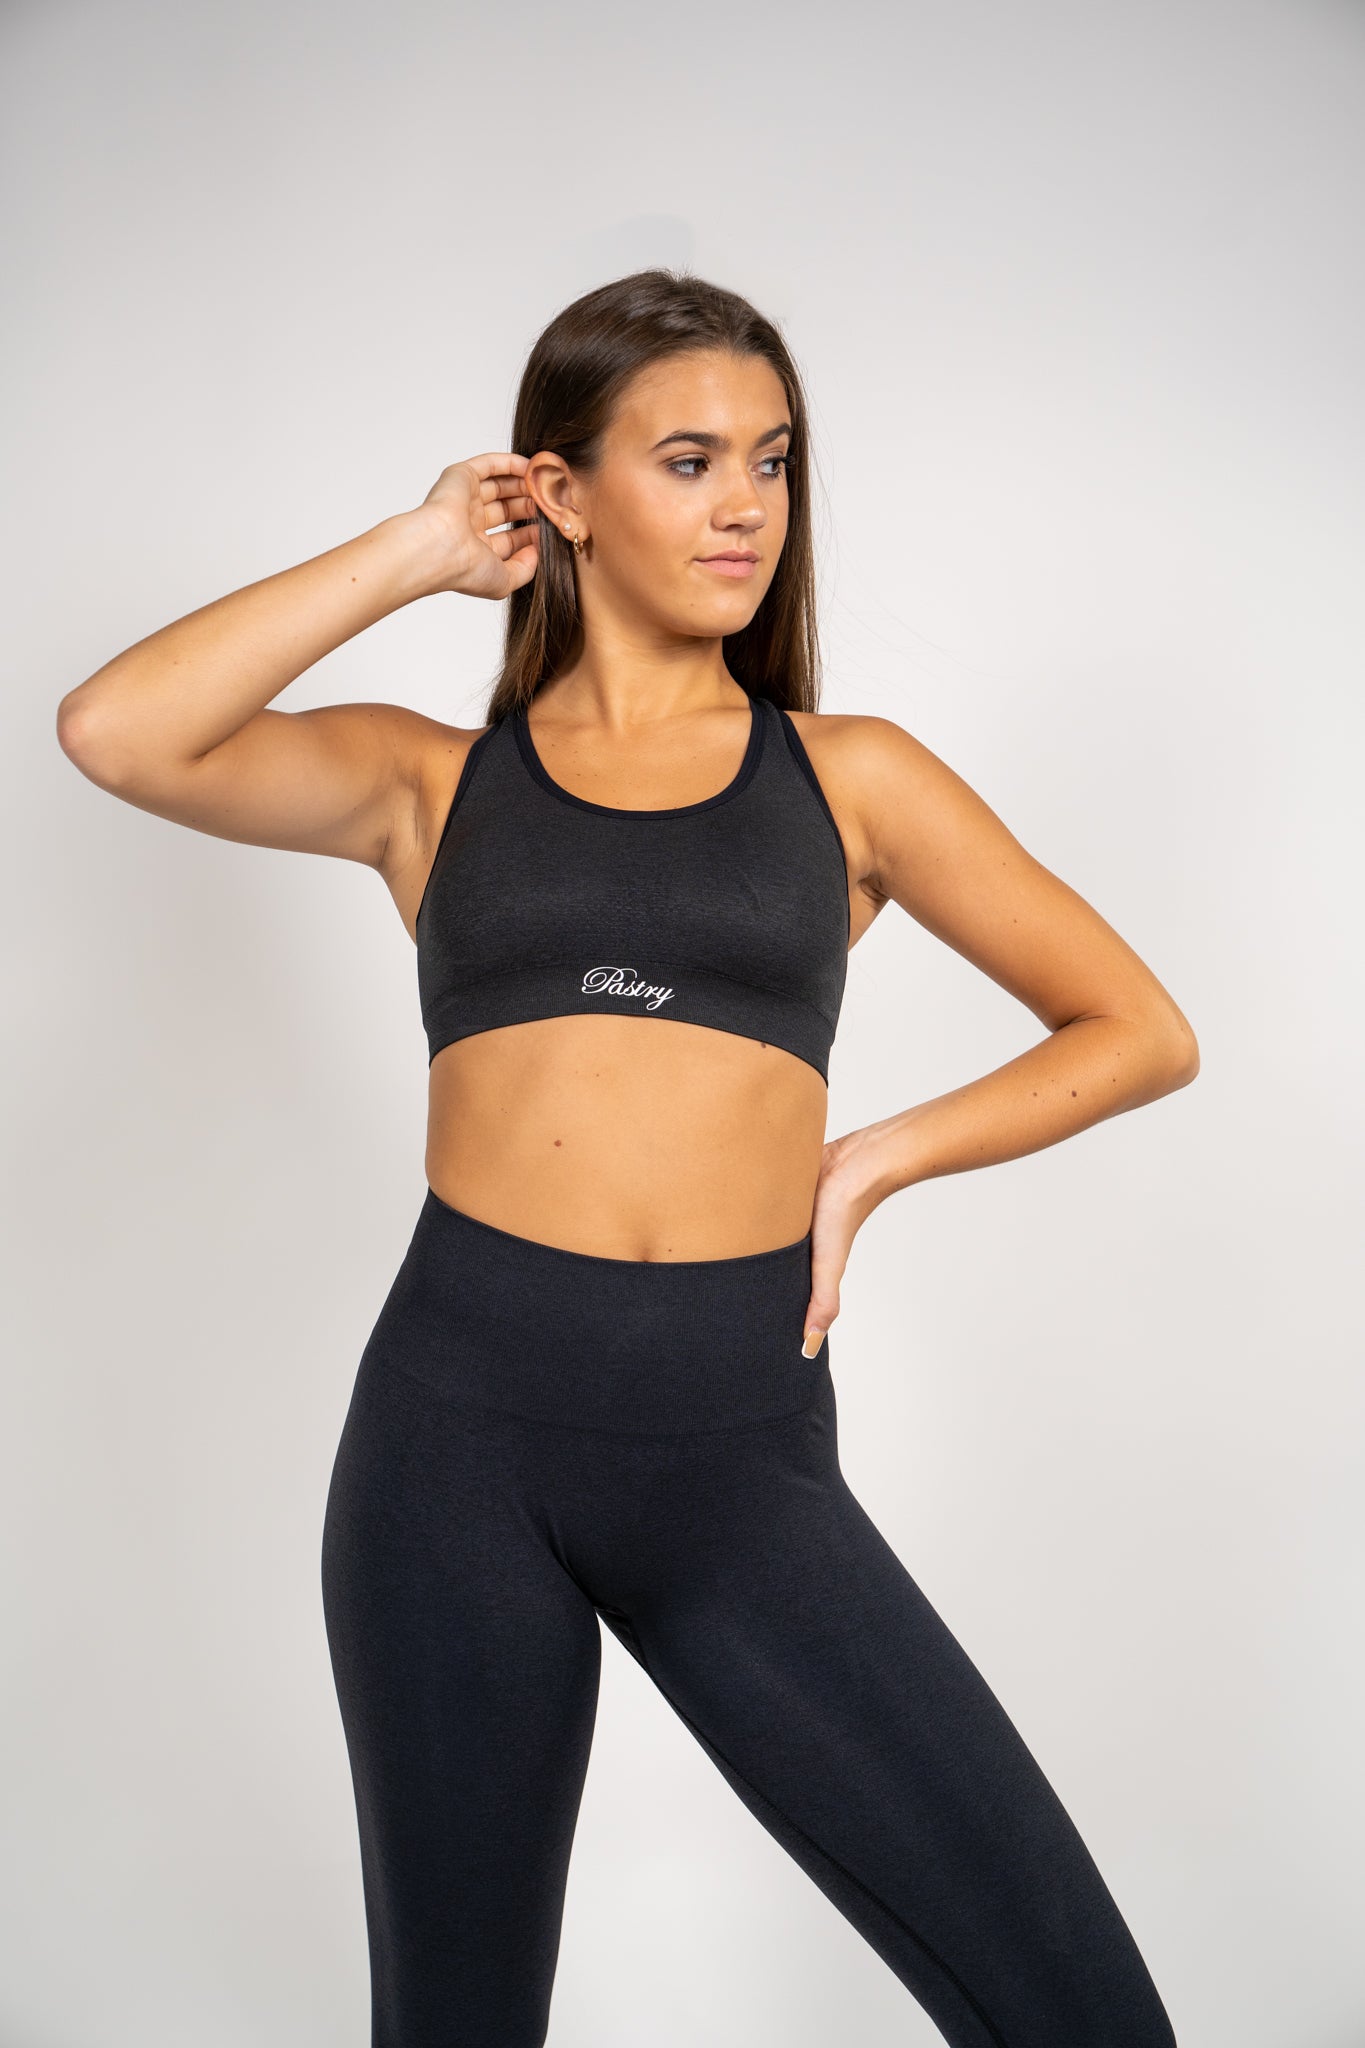 Woman wearing Pastry Seamless Vital Sports Bra Black Marl front view